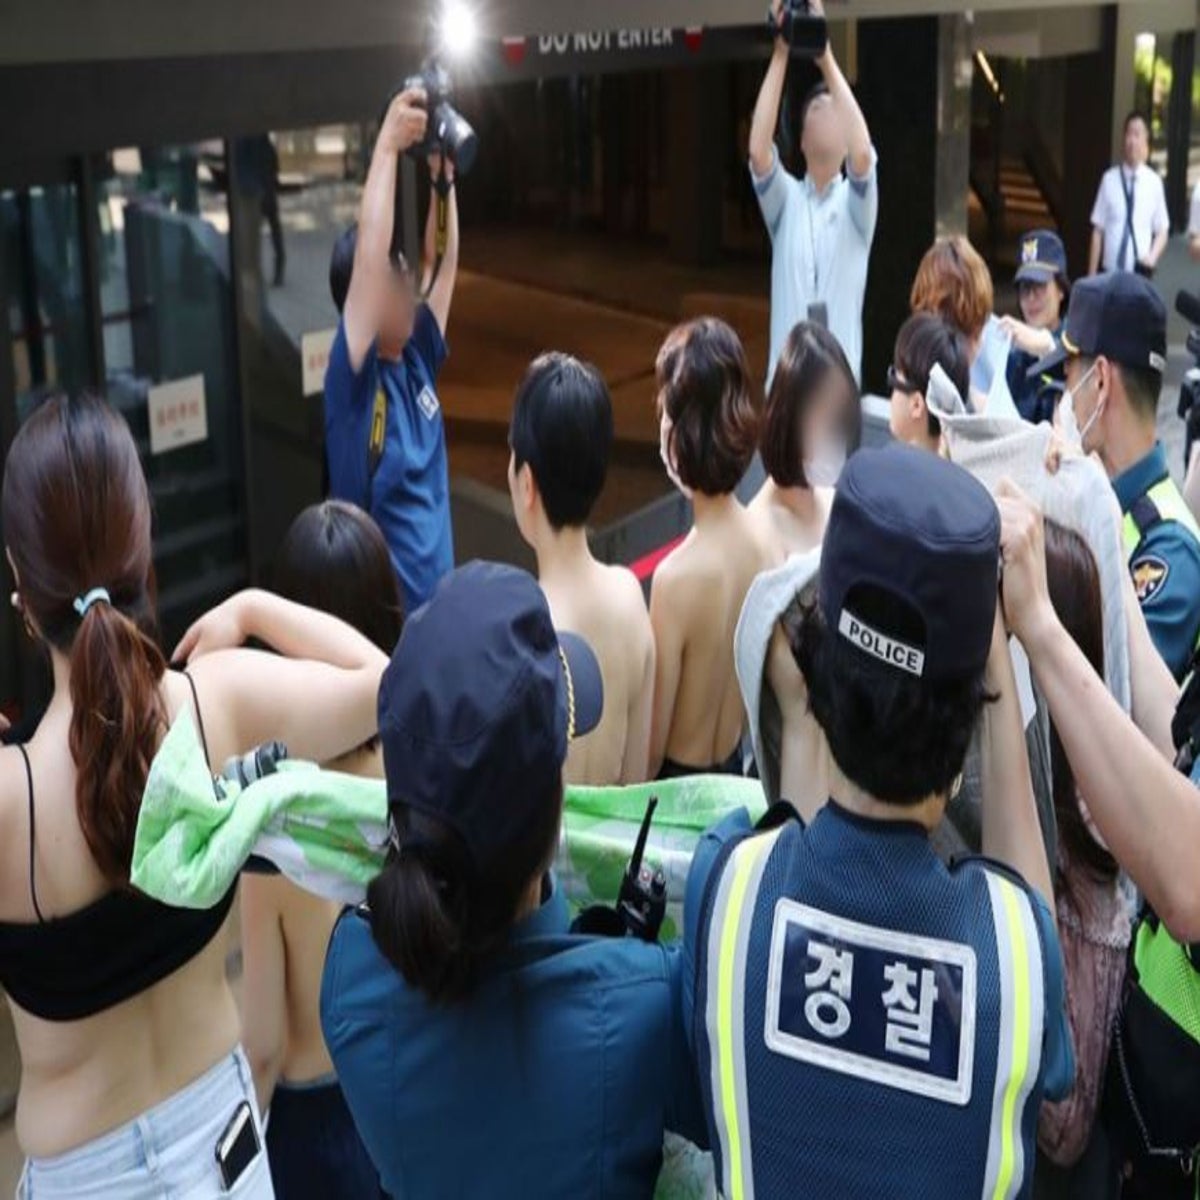 Asia Nude Beach Porn - Women stage topless protest over Facebook 'discrimination' in South Korea |  The Independent | The Independent